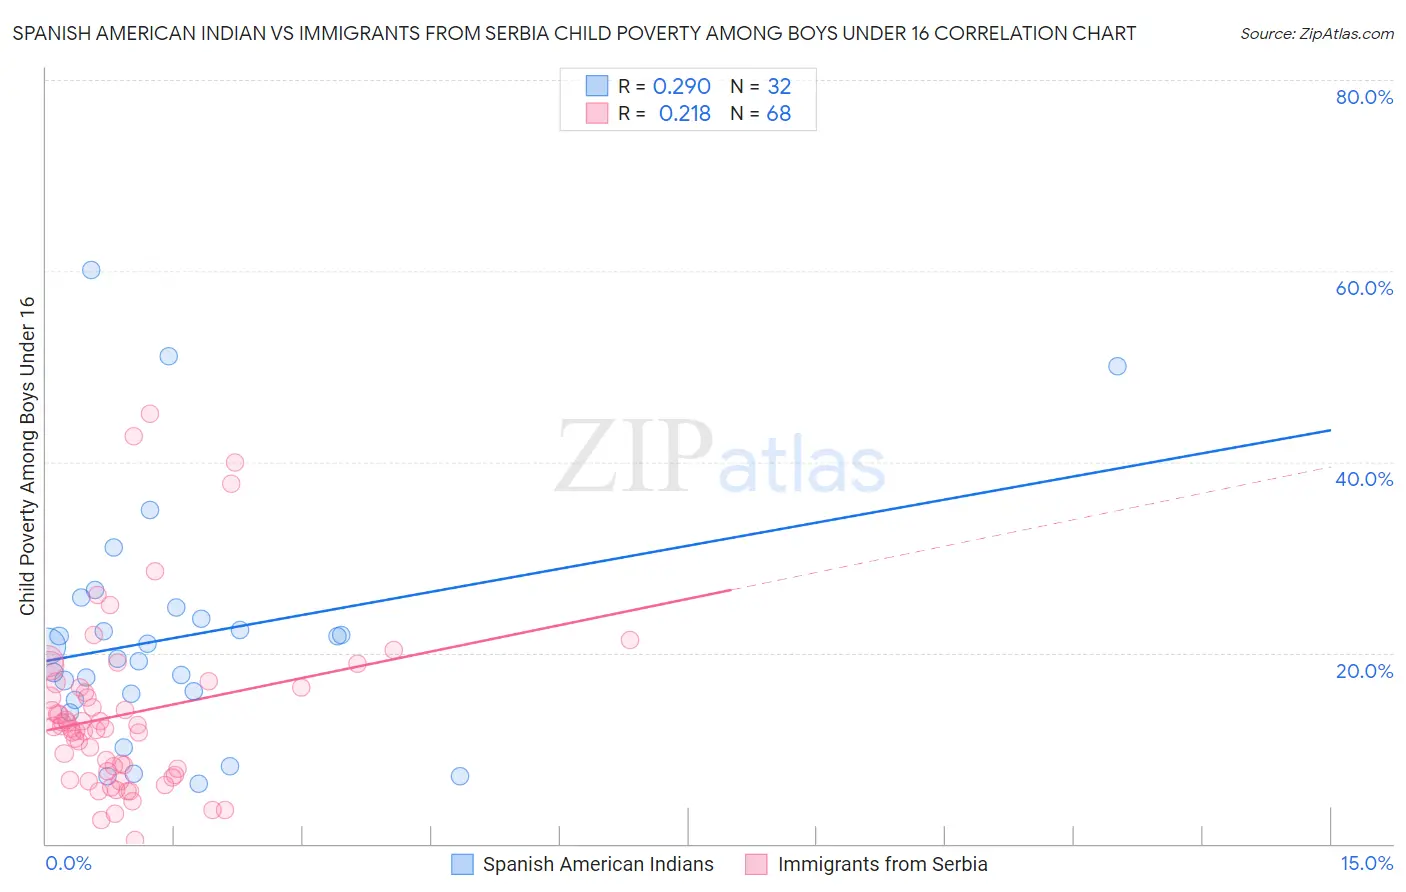 Spanish American Indian vs Immigrants from Serbia Child Poverty Among Boys Under 16